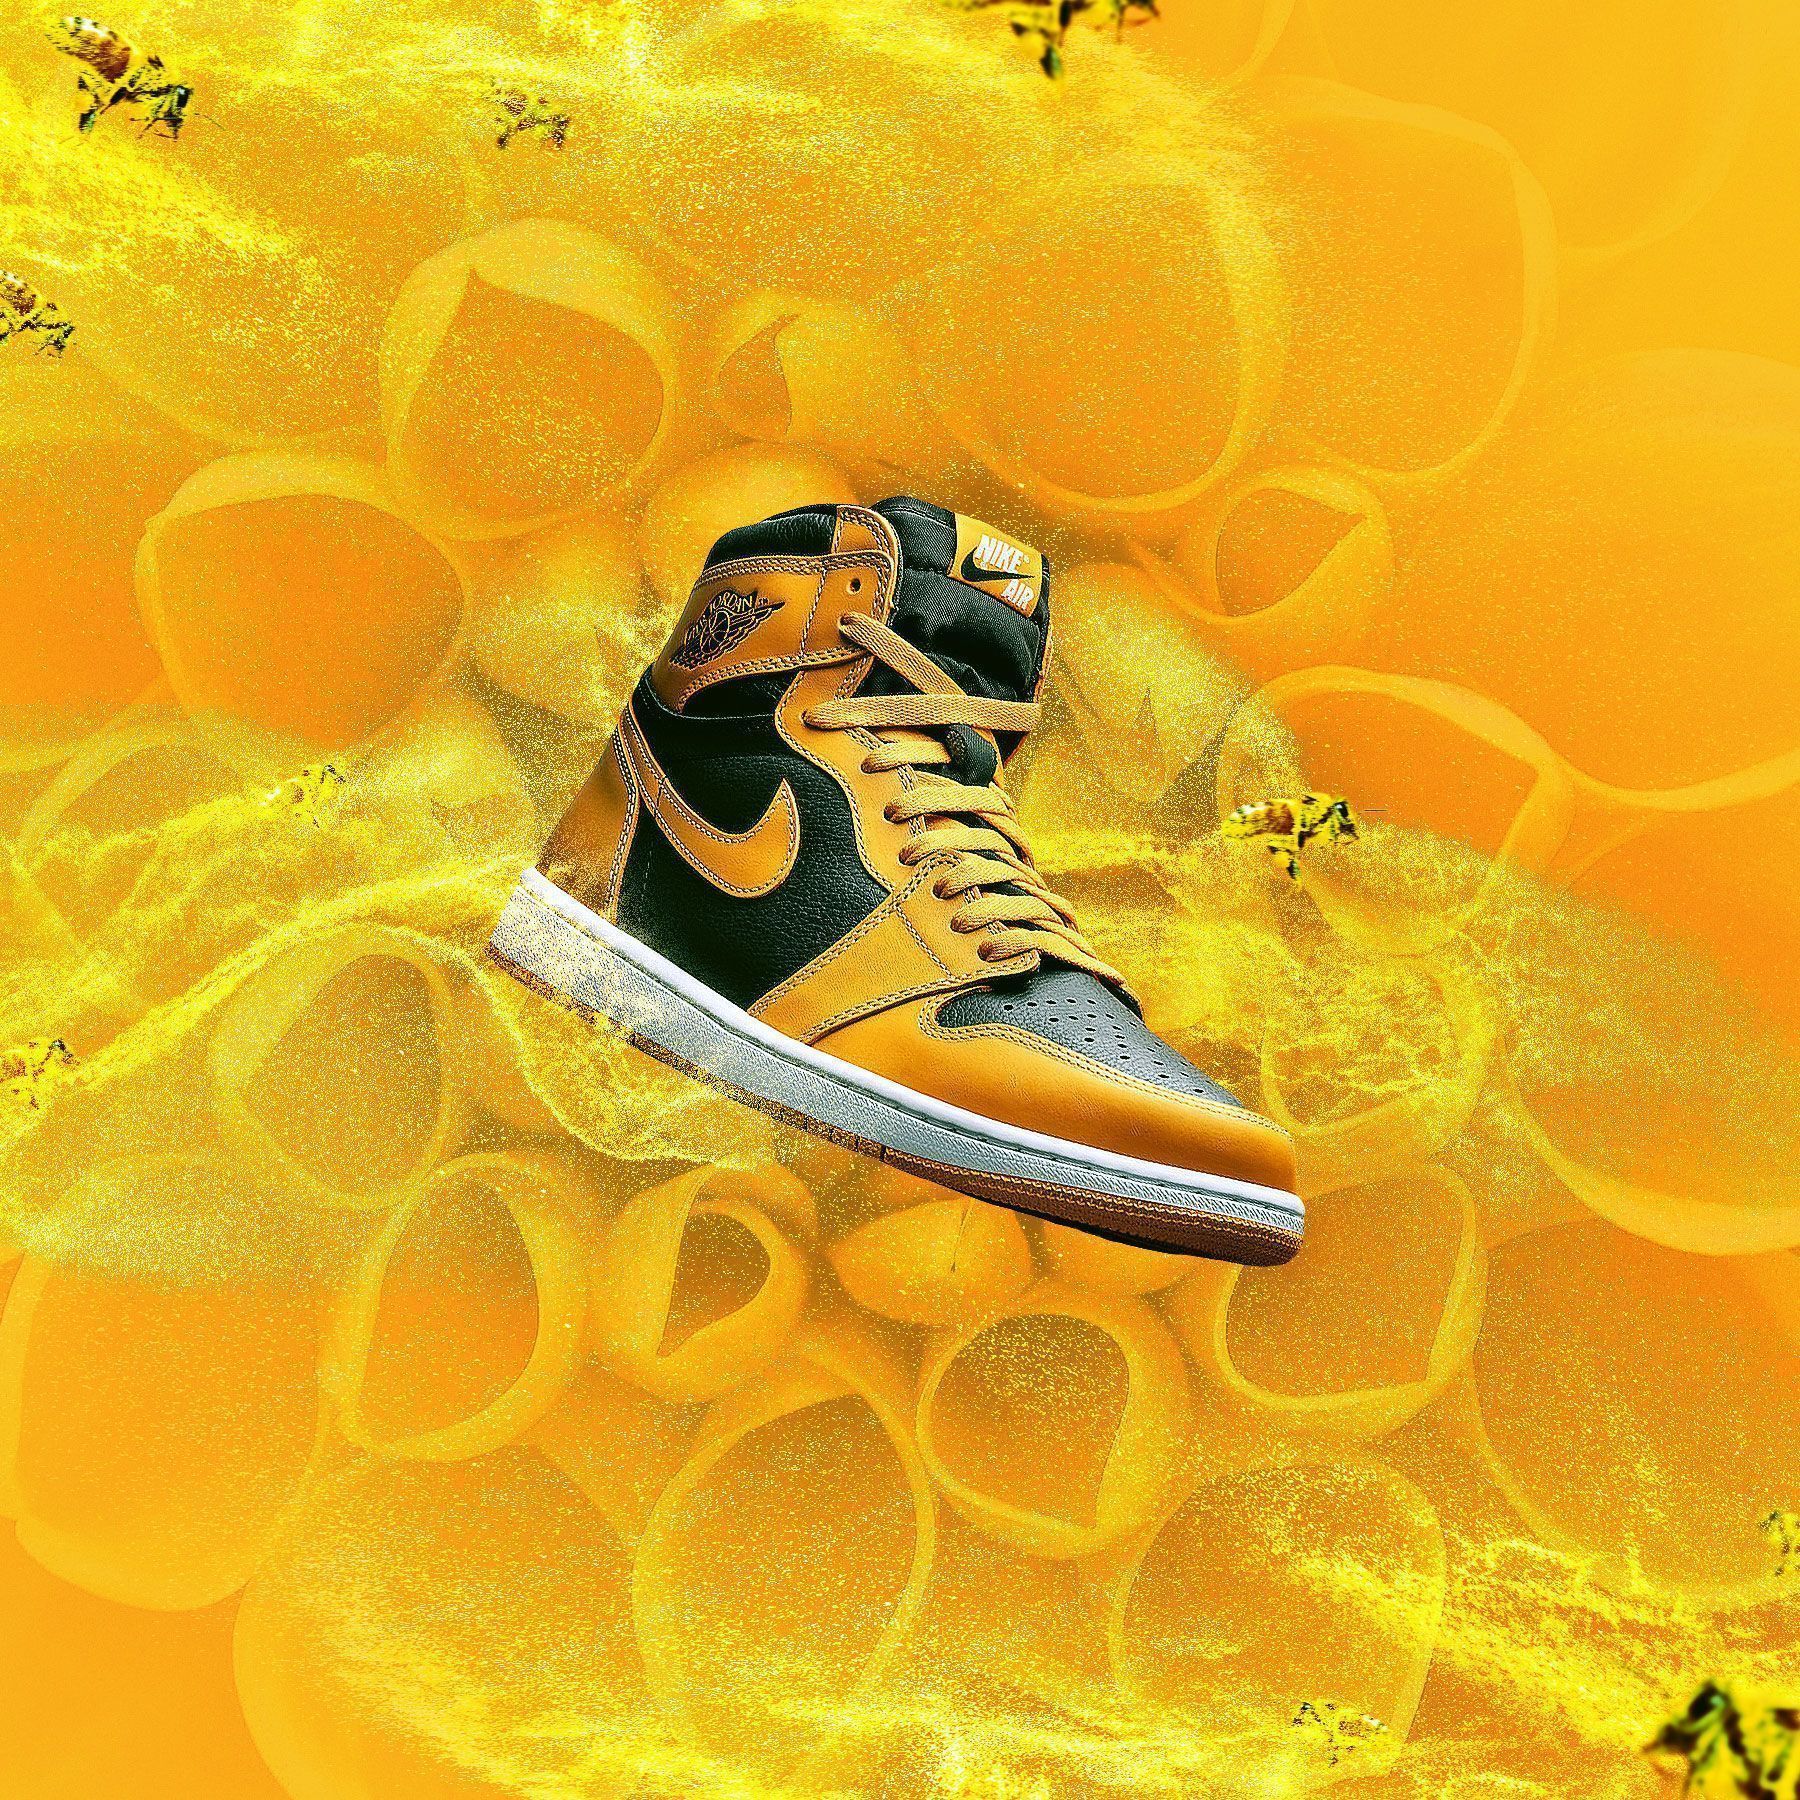 A yellow and black shoe is on top of some flowers - Air Jordan 1